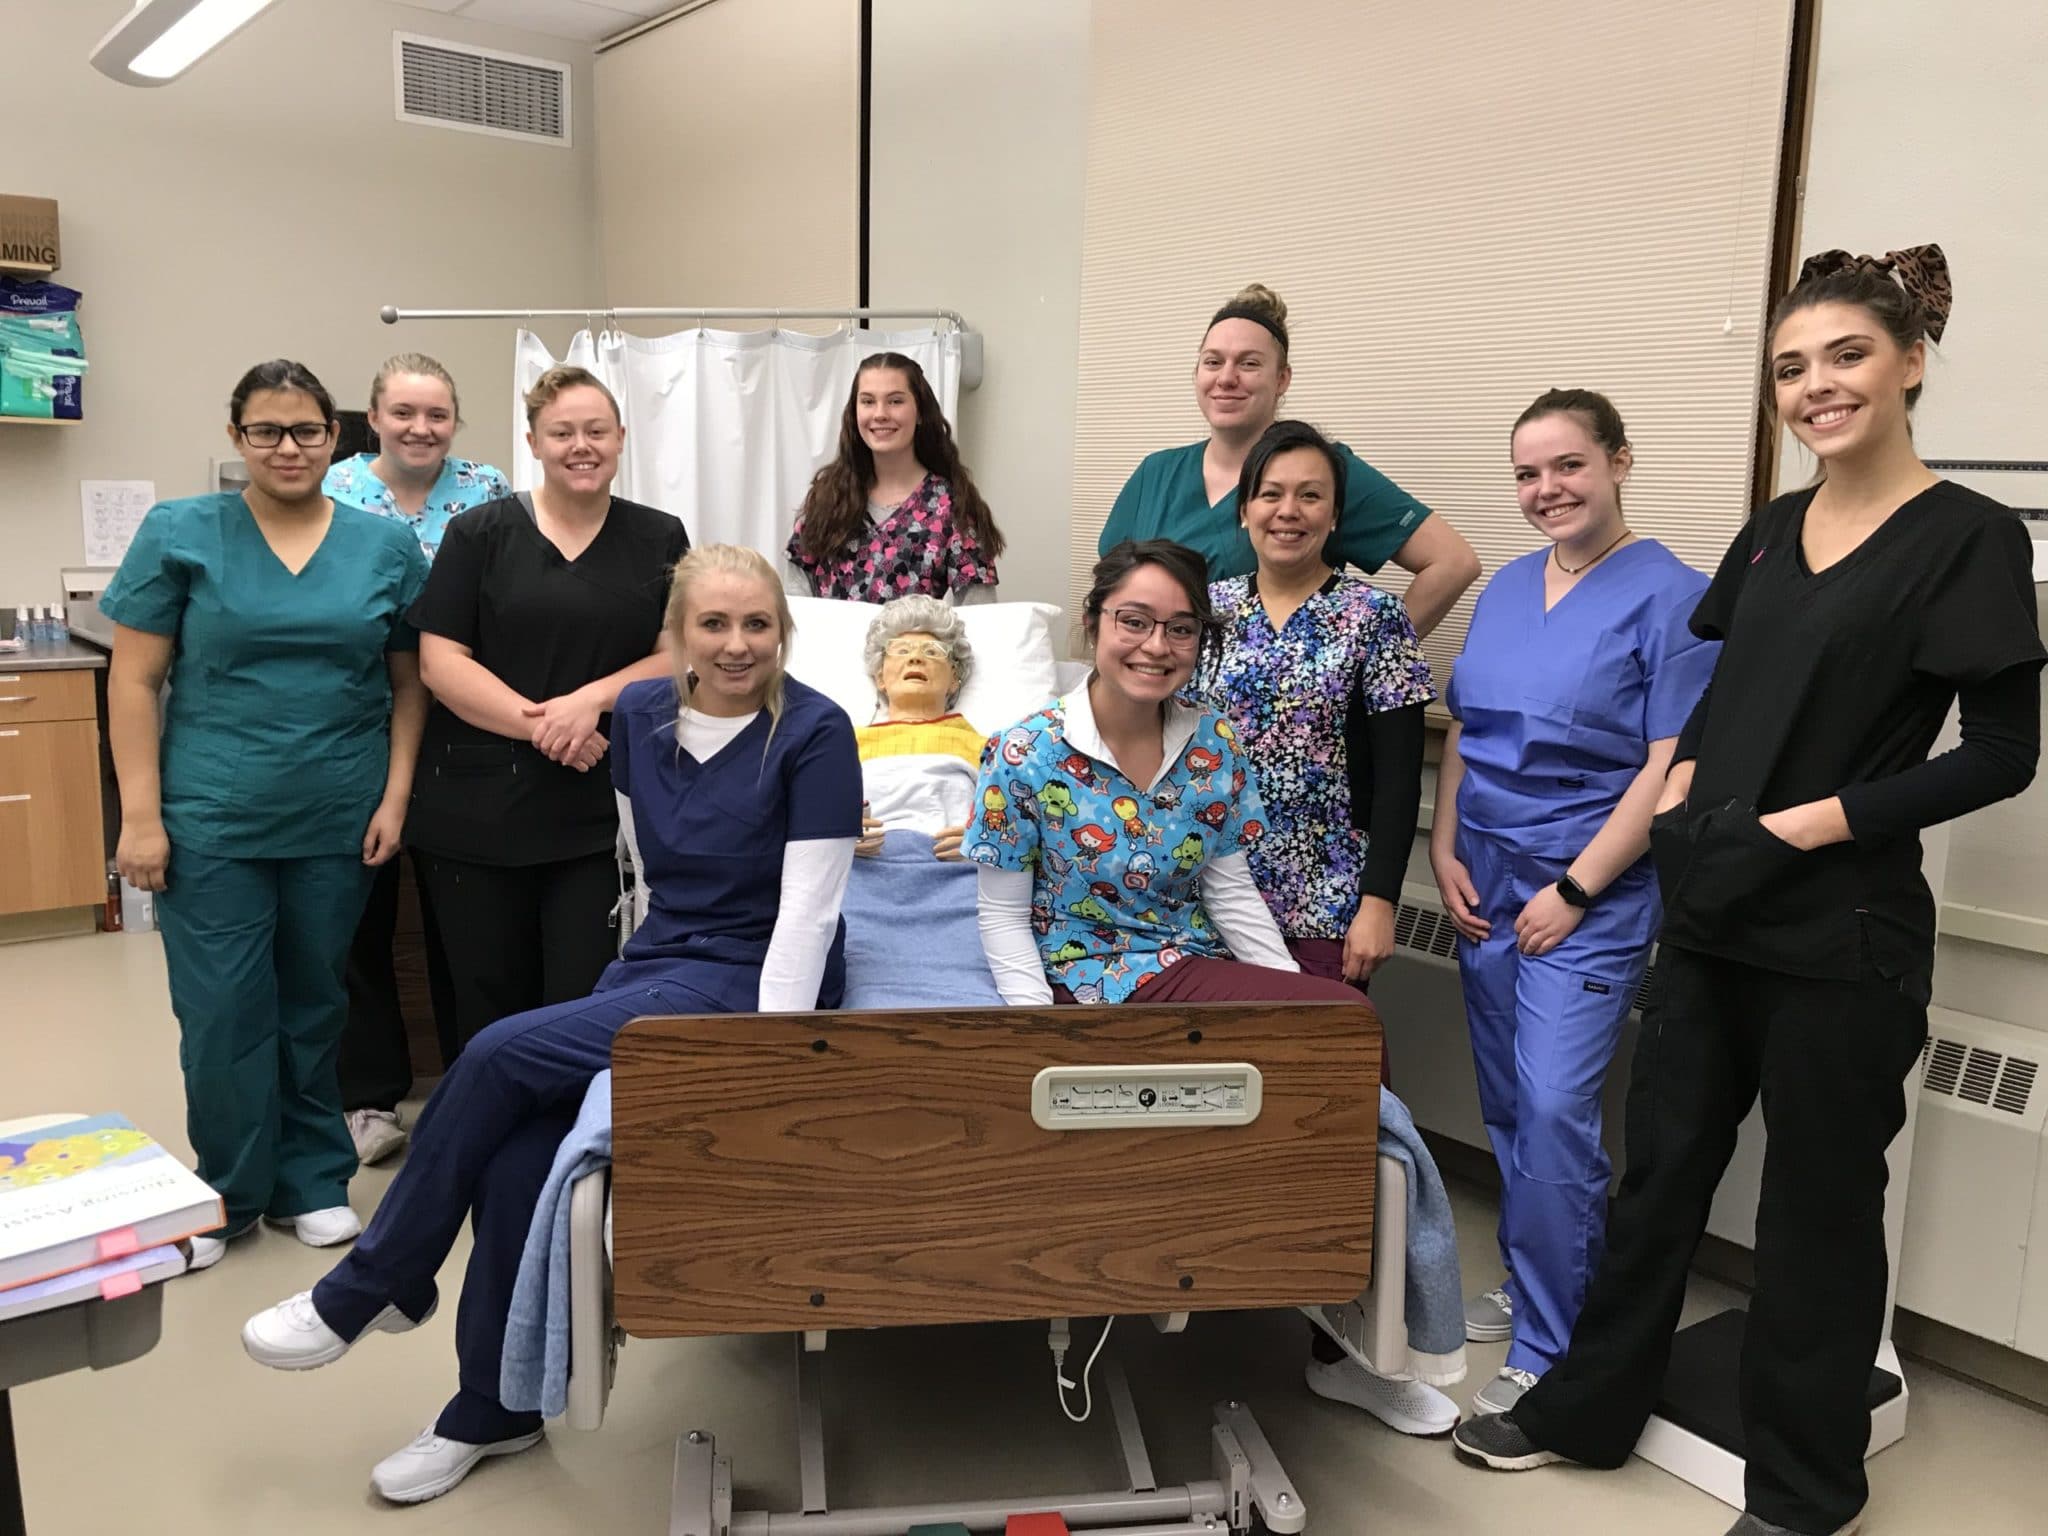 CMC Certified Nurse Aides pose with a simulated patient